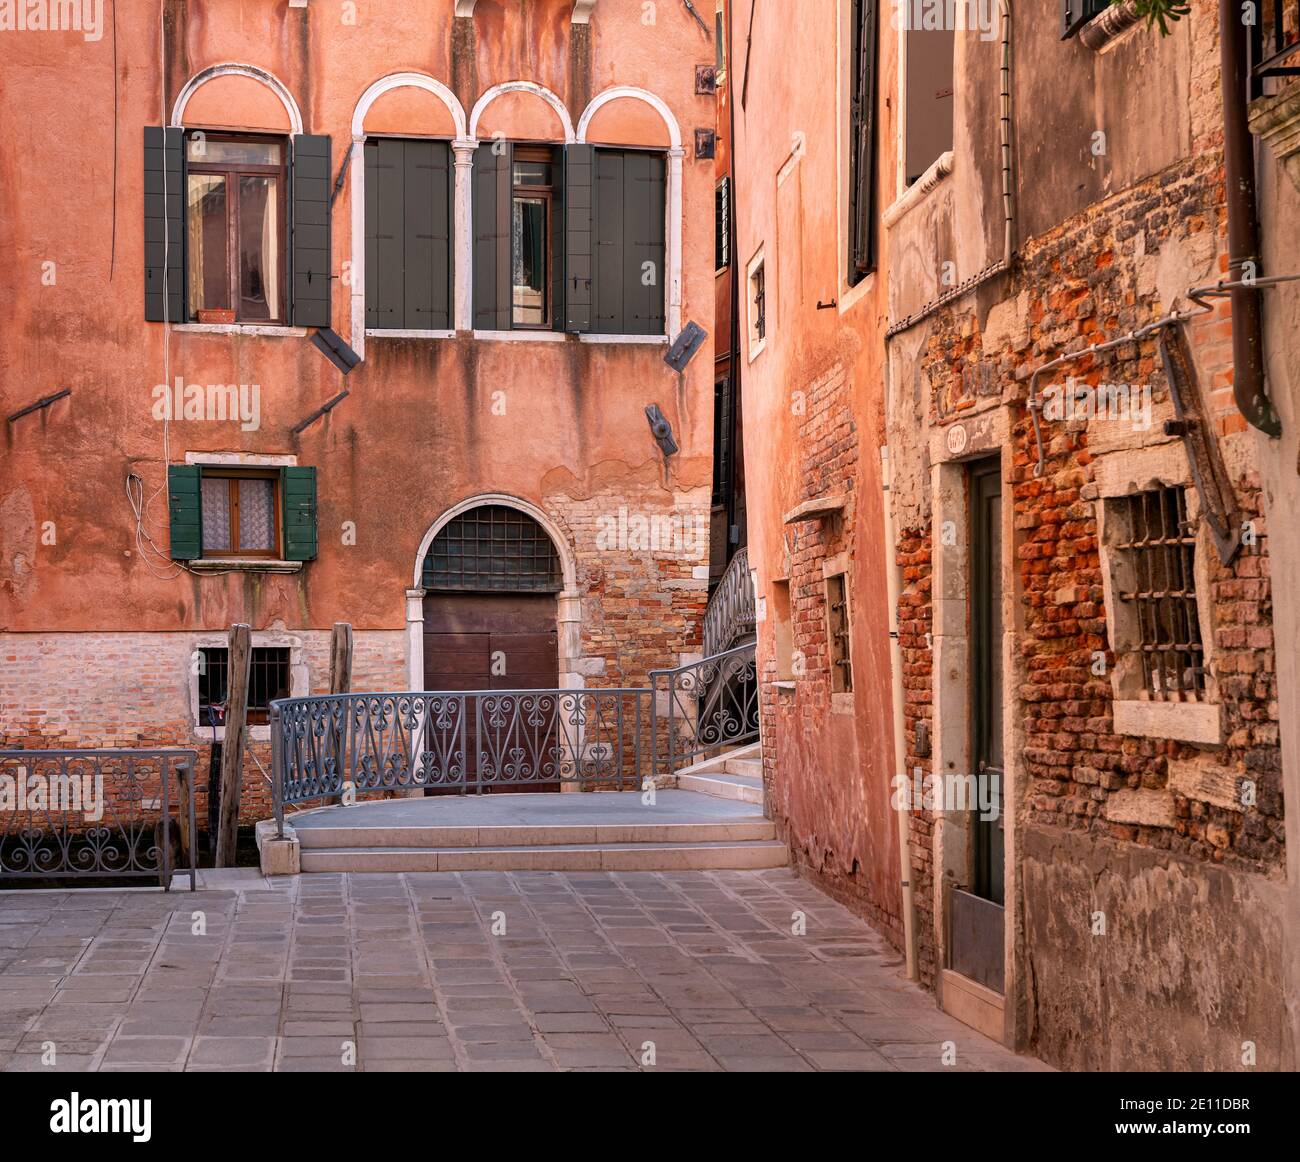 Small Alley In Venice, Italy Stock Photo